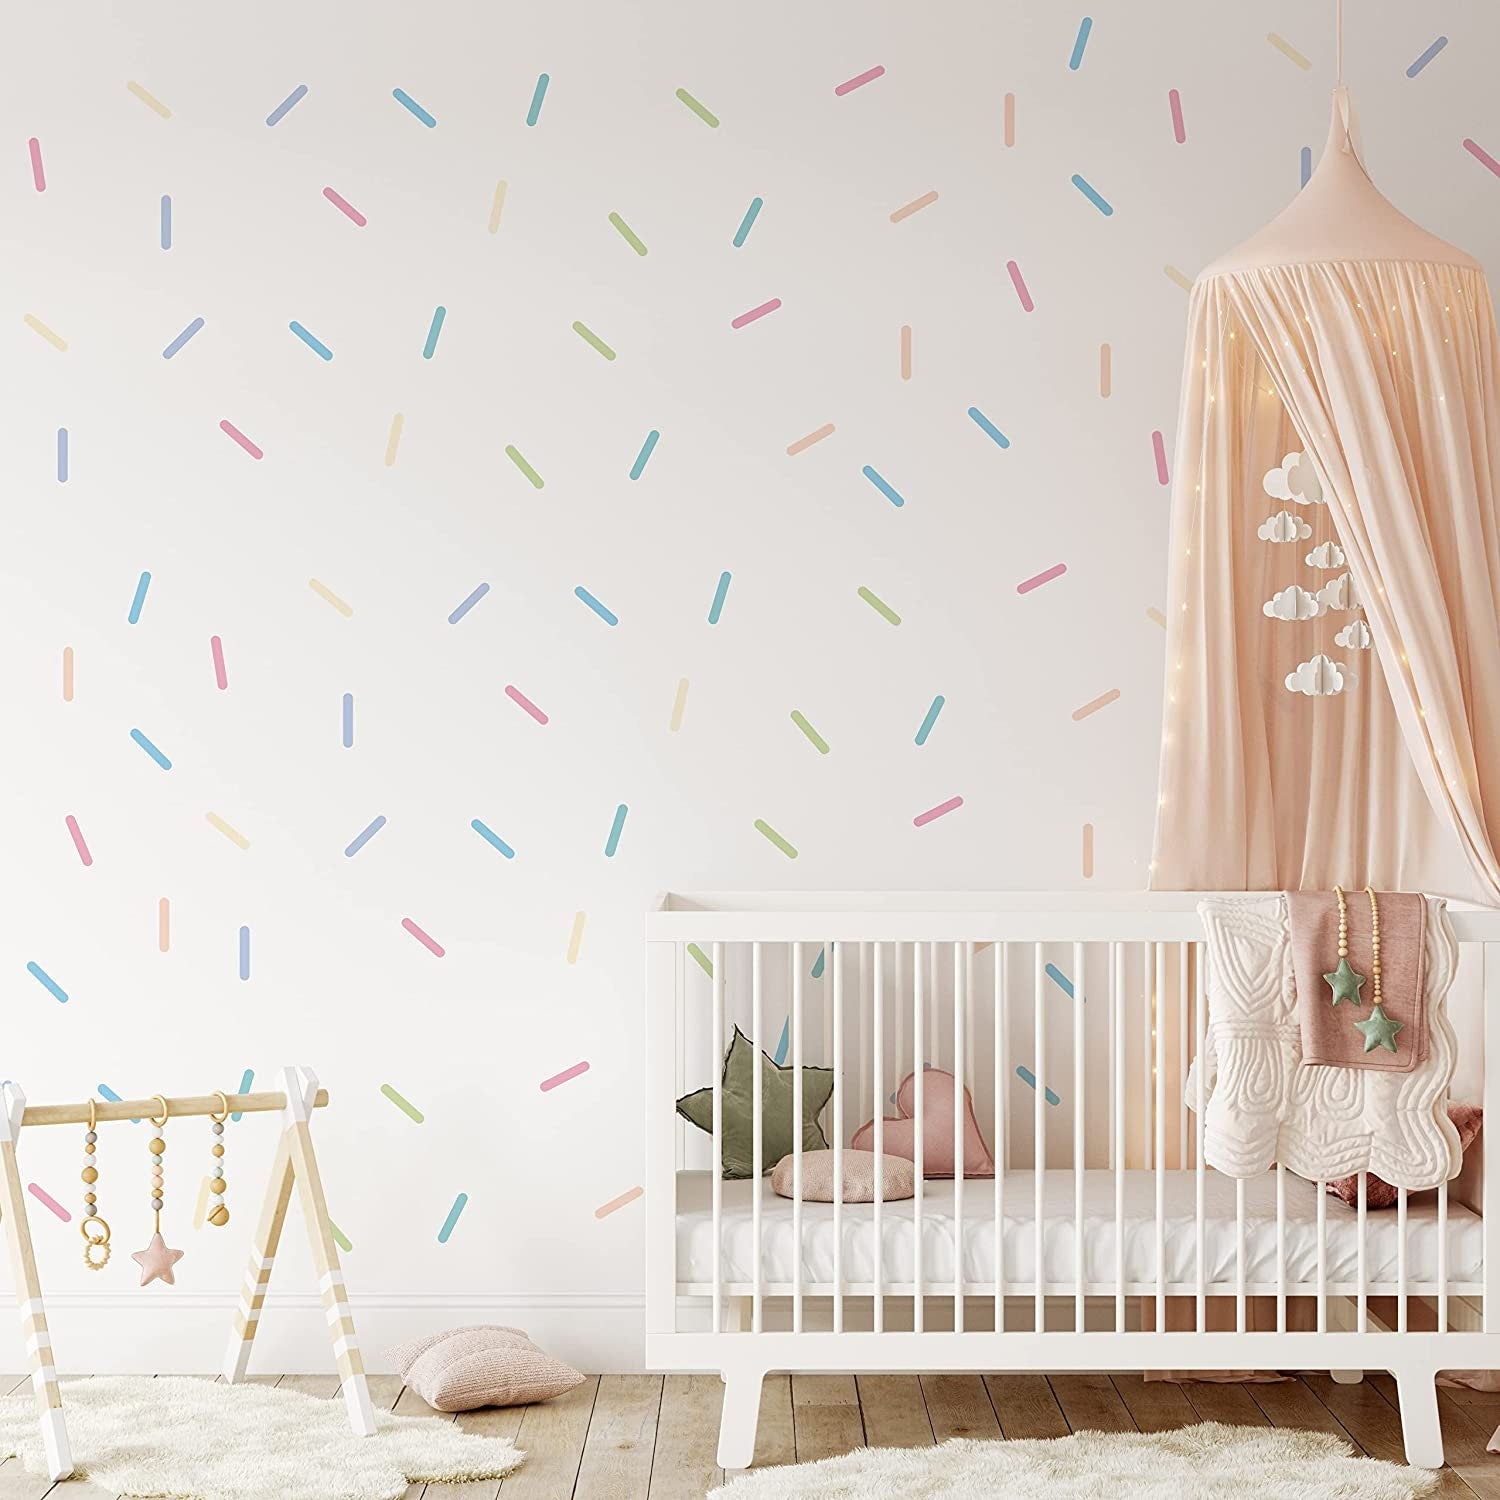 Confetti Wall Stickers, Sprinkles Wall Stickers, Wall Stickers For Children's Rooms, Wall Decals For Nursery, Nursery Wall Stickers